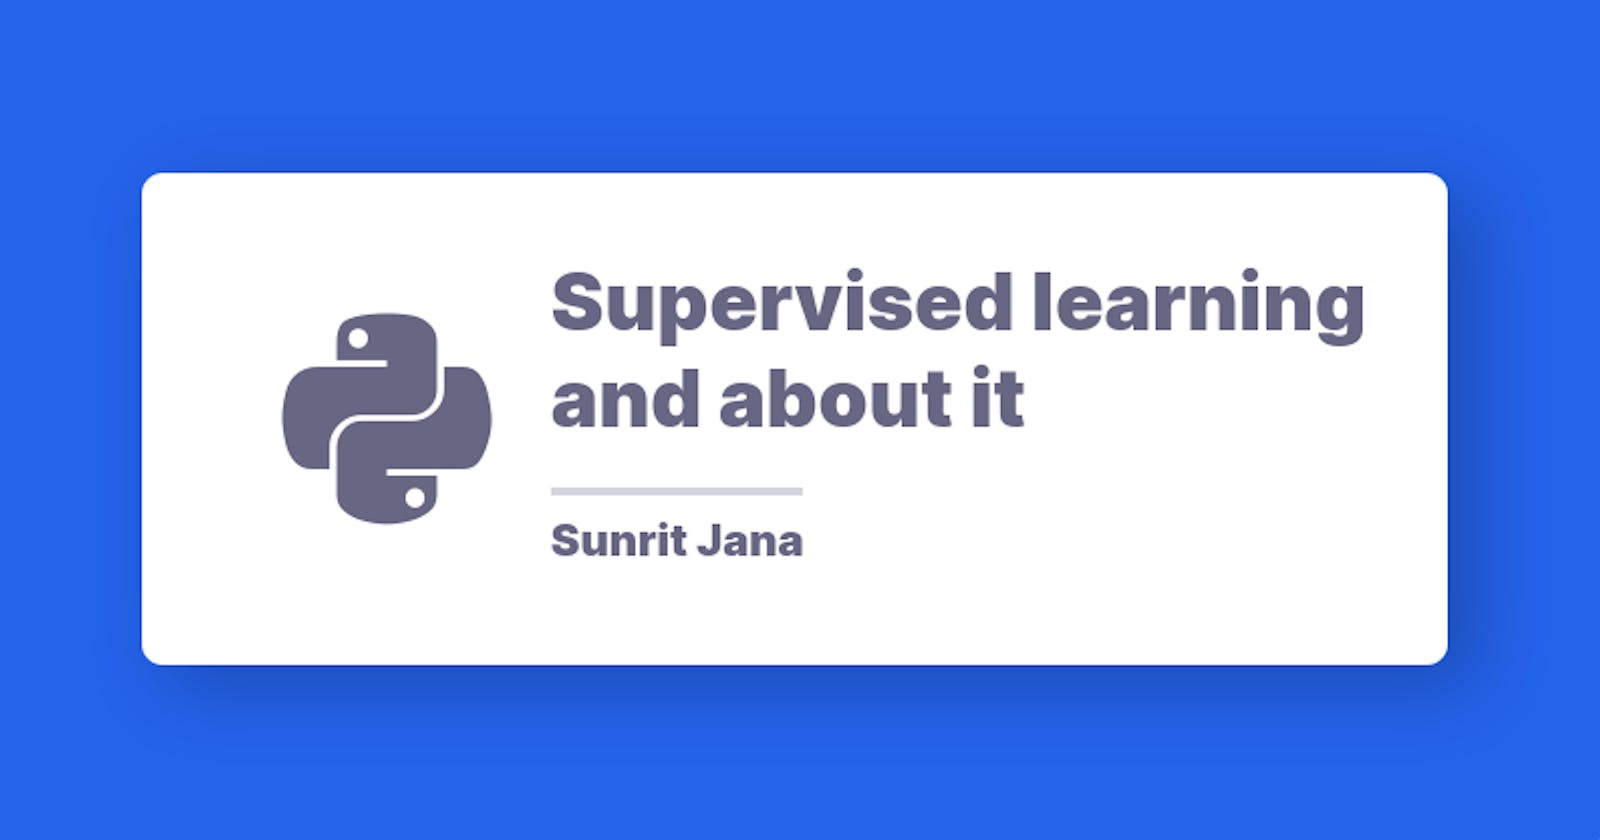 Supervised learning and about it